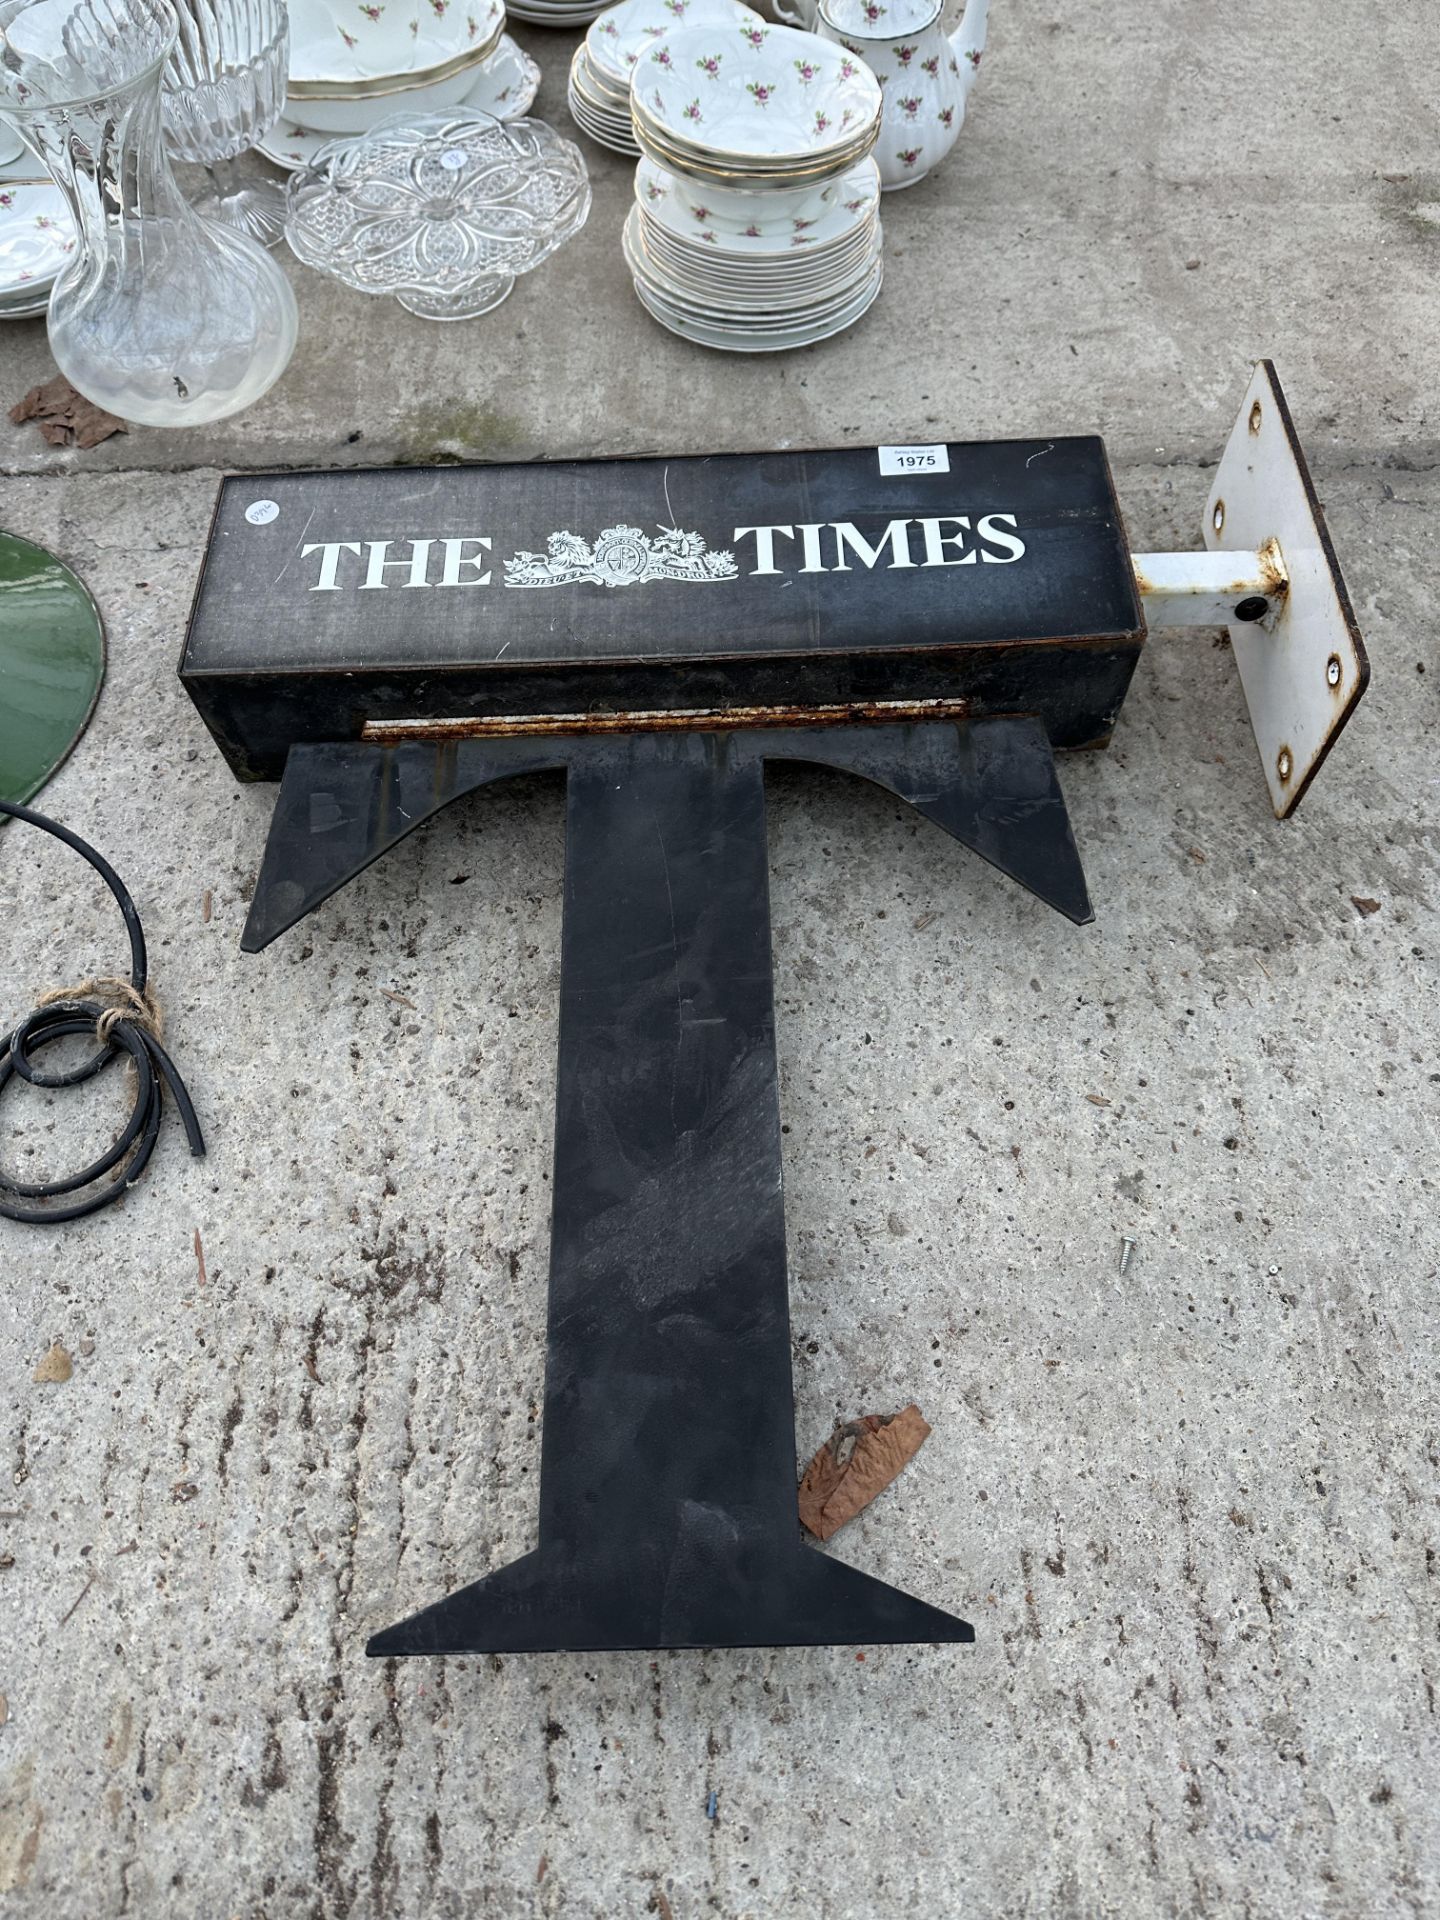 A VINTAGE 'THE TIMES' SIGN